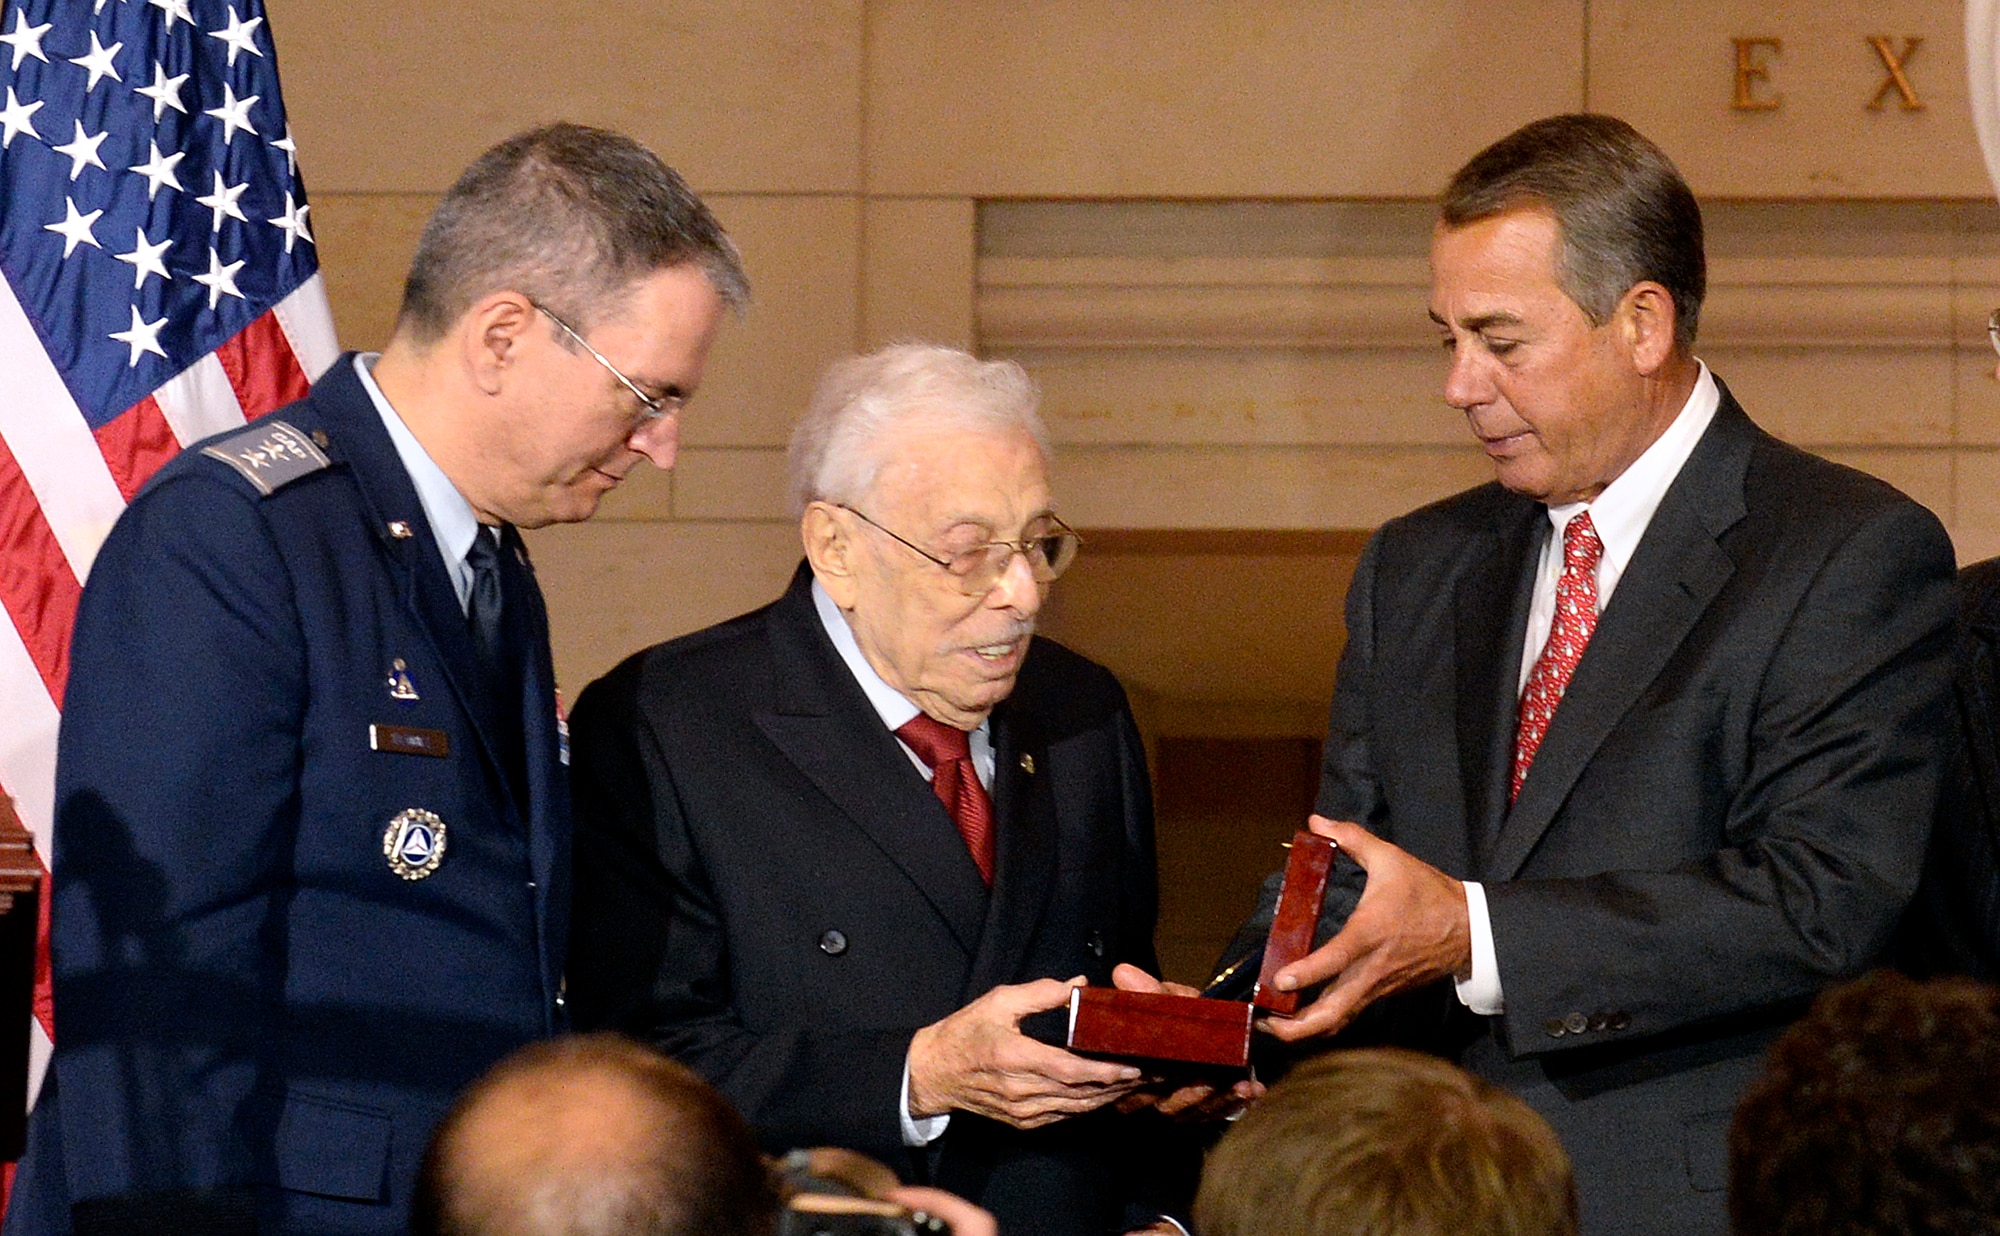 Civil Air Patrol National Commander Joseph Vazquez looks on as Speaker of the U.S. House of Representatives John Boehner presents the Congressional Gold Medal to Lester Wolff, a former member of Congress and Civil Air Patrol veteran, during a ceremony Dec. 10, 2014, on Capitol Hill, Washington, D.C.  Vazquez and Wolff accepted the medal on behalf of the CAP World War II members.  (U.S. Air Force/Andy Morataya)